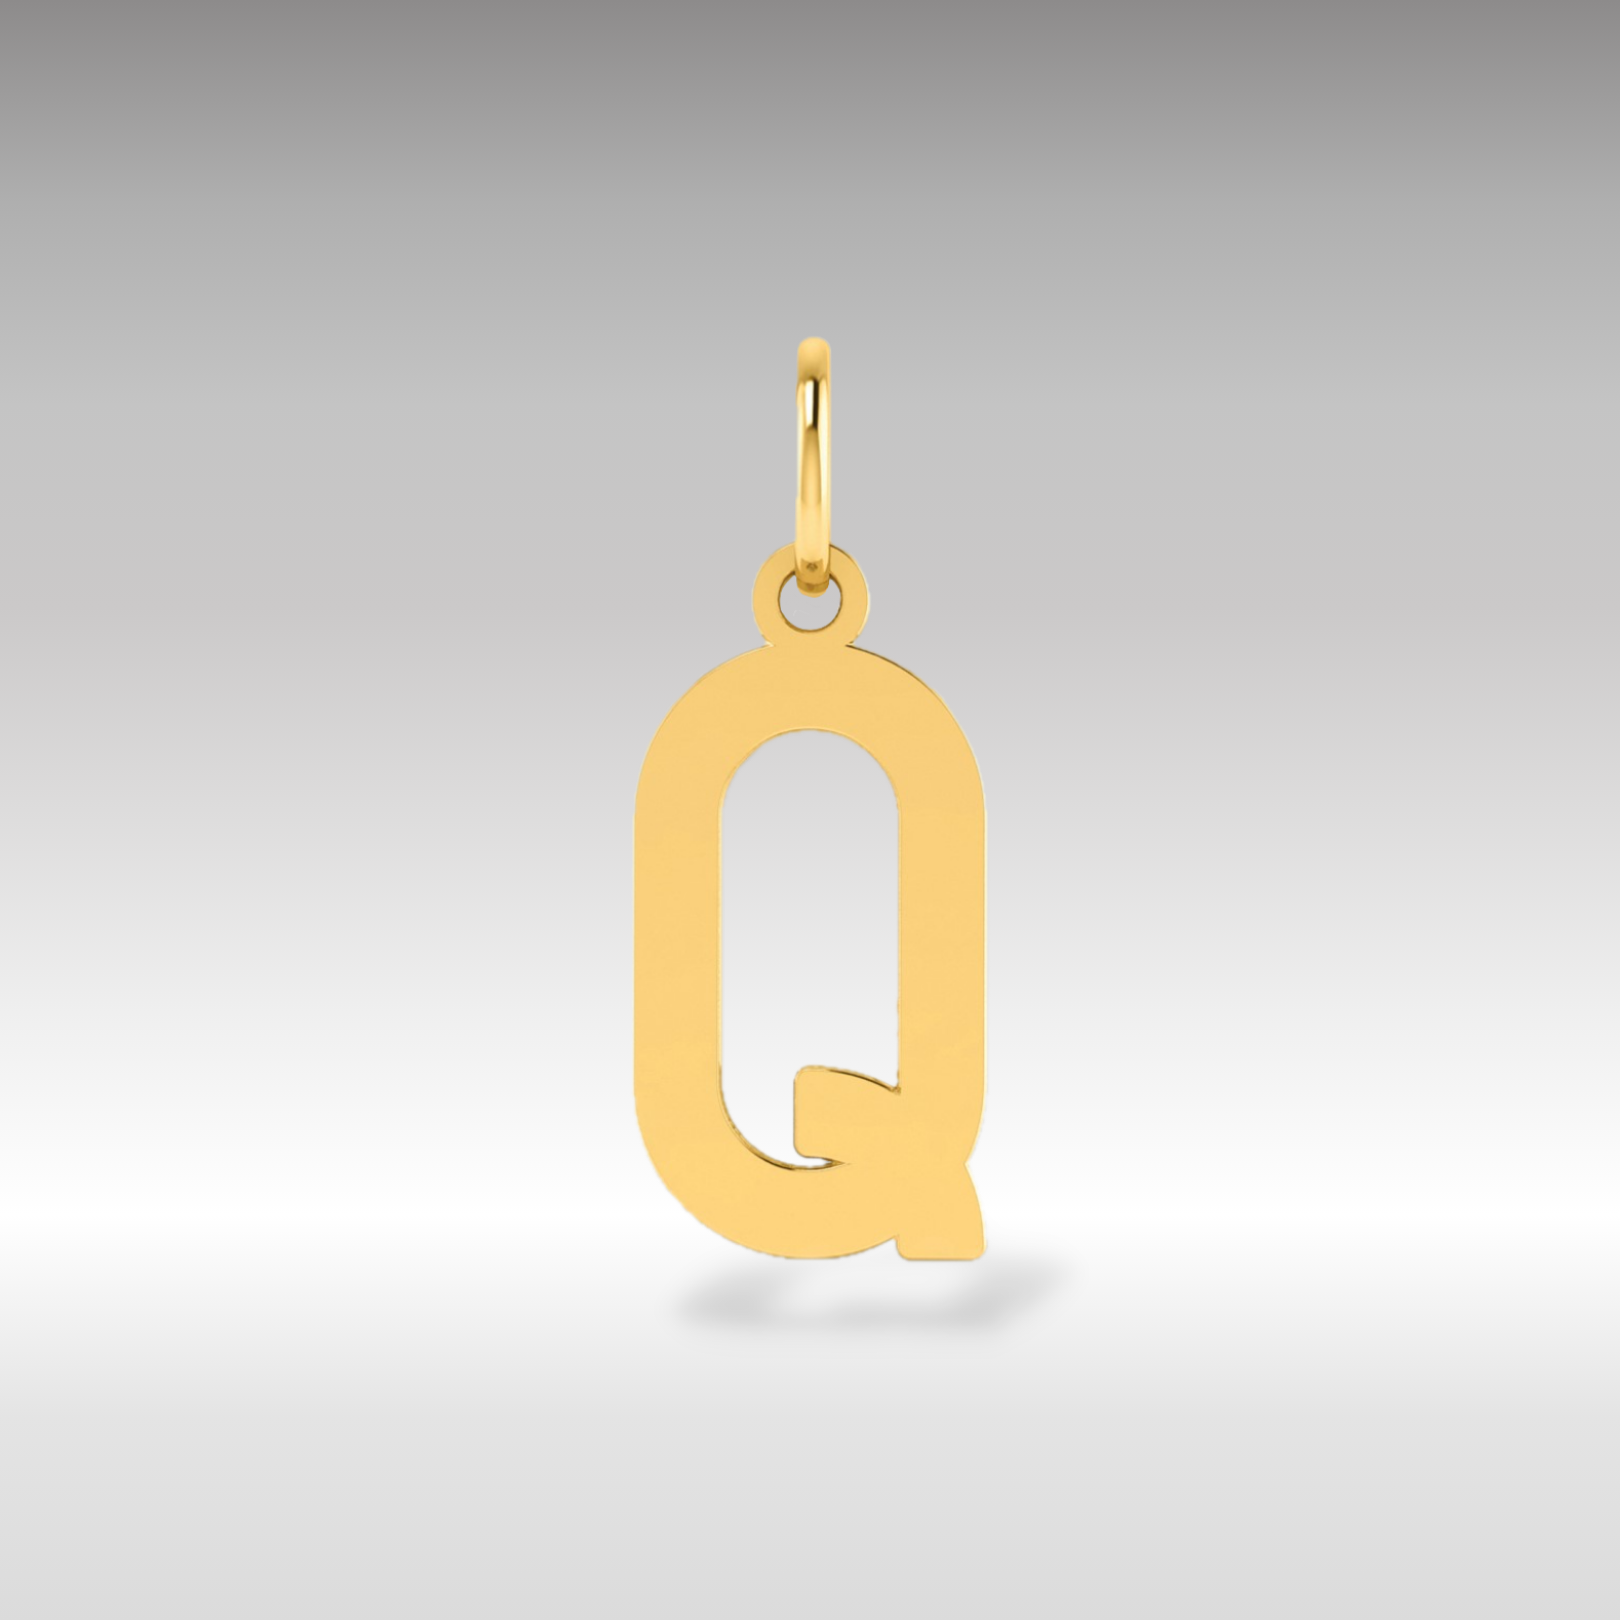 14K Gold Letter "Q" Initial Pendant - Charlie & Co. Jewelry